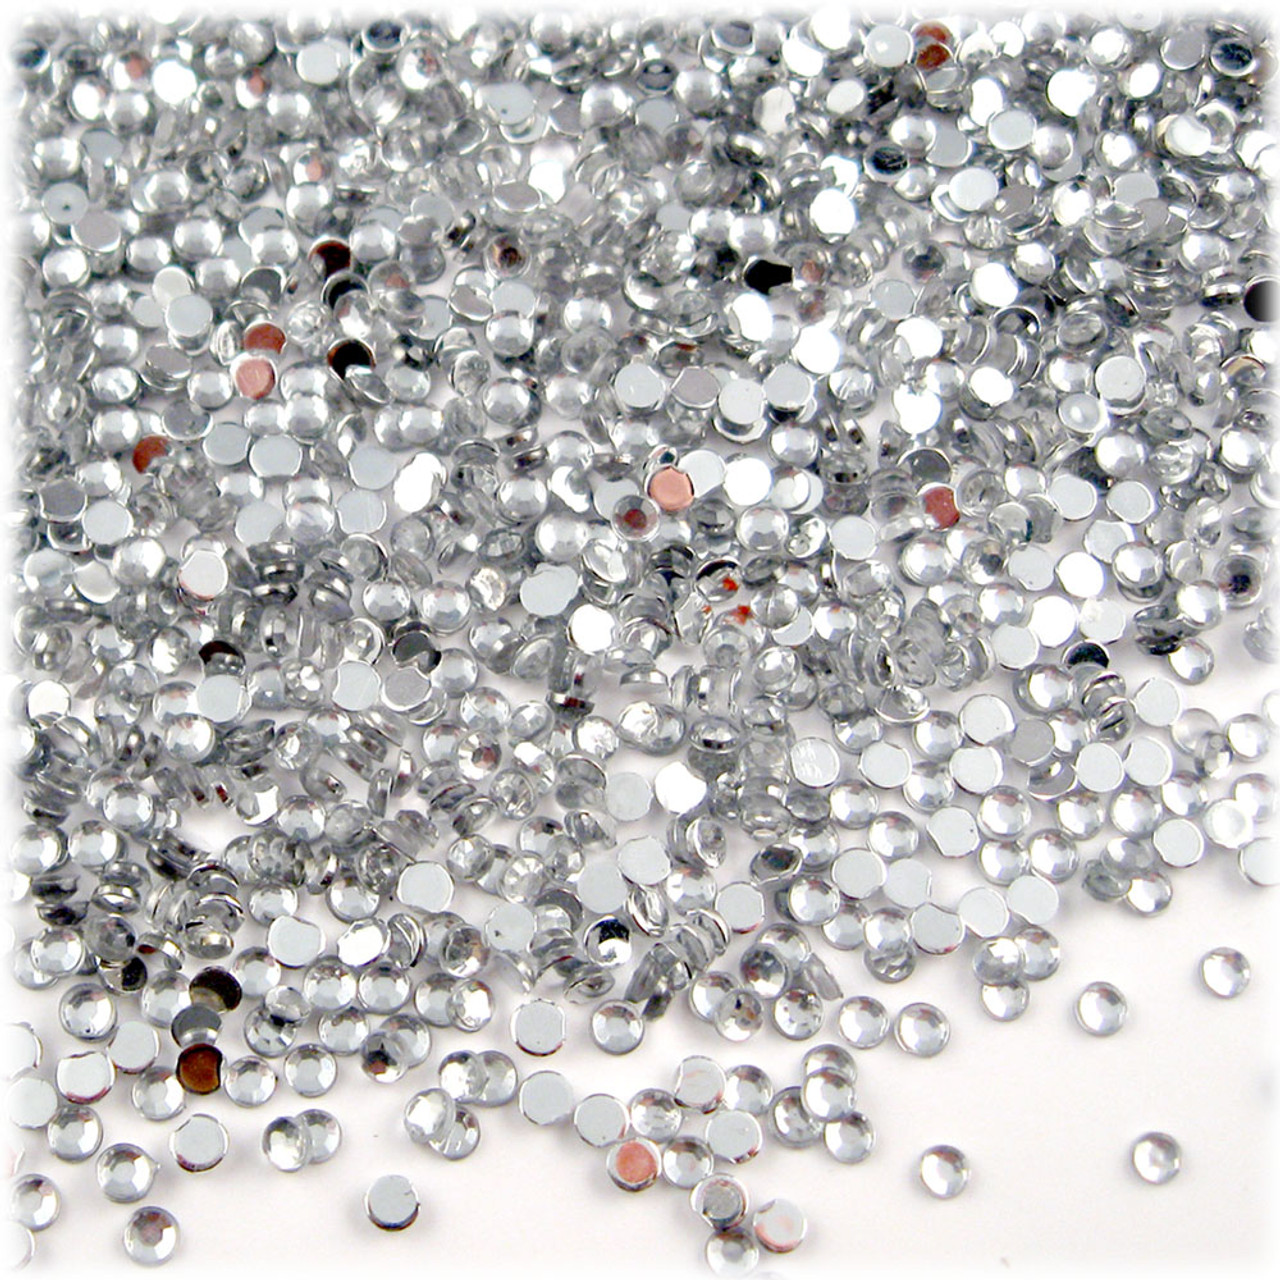 500pcs About 3/4/5mm Real White Flat Back Rhinestones For Crafts